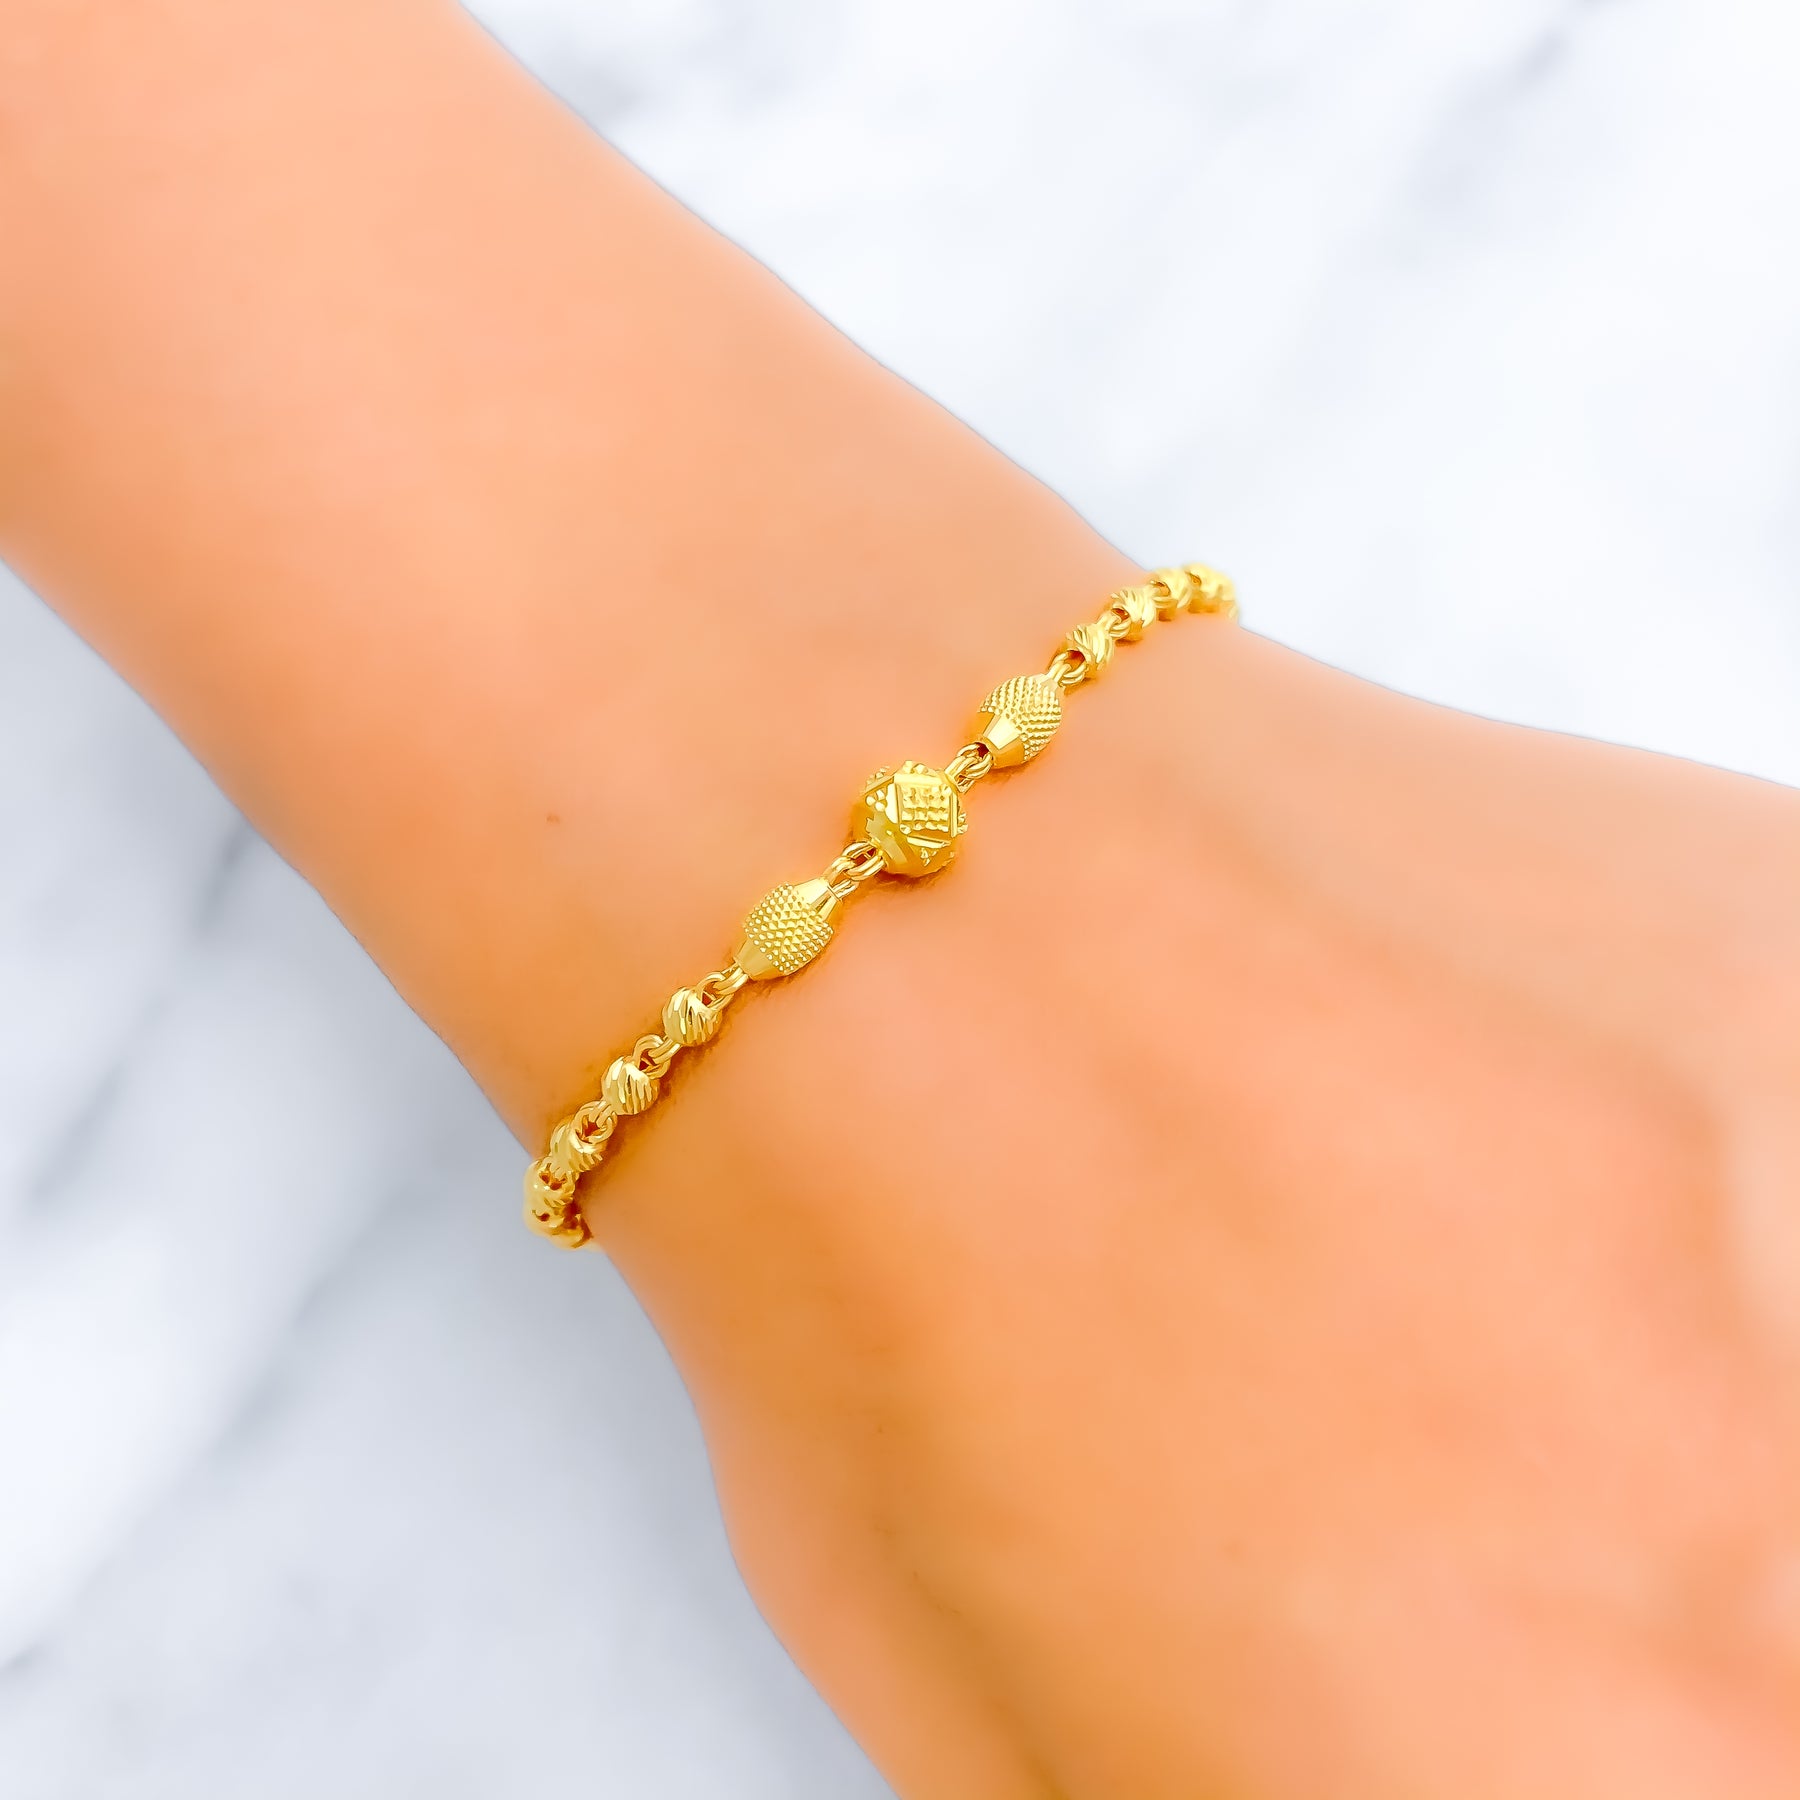 Buy WHP Gold Bracelet For Kids For Kids, 18KT(916) BIS Hallmark Pure Gold,  Kidss Accessories, Suitable Birthday Gift For Husband, Special Bracelet  Kids, Gifts For Brother Birthday Special, GBRKD23009165 at Amazon.in